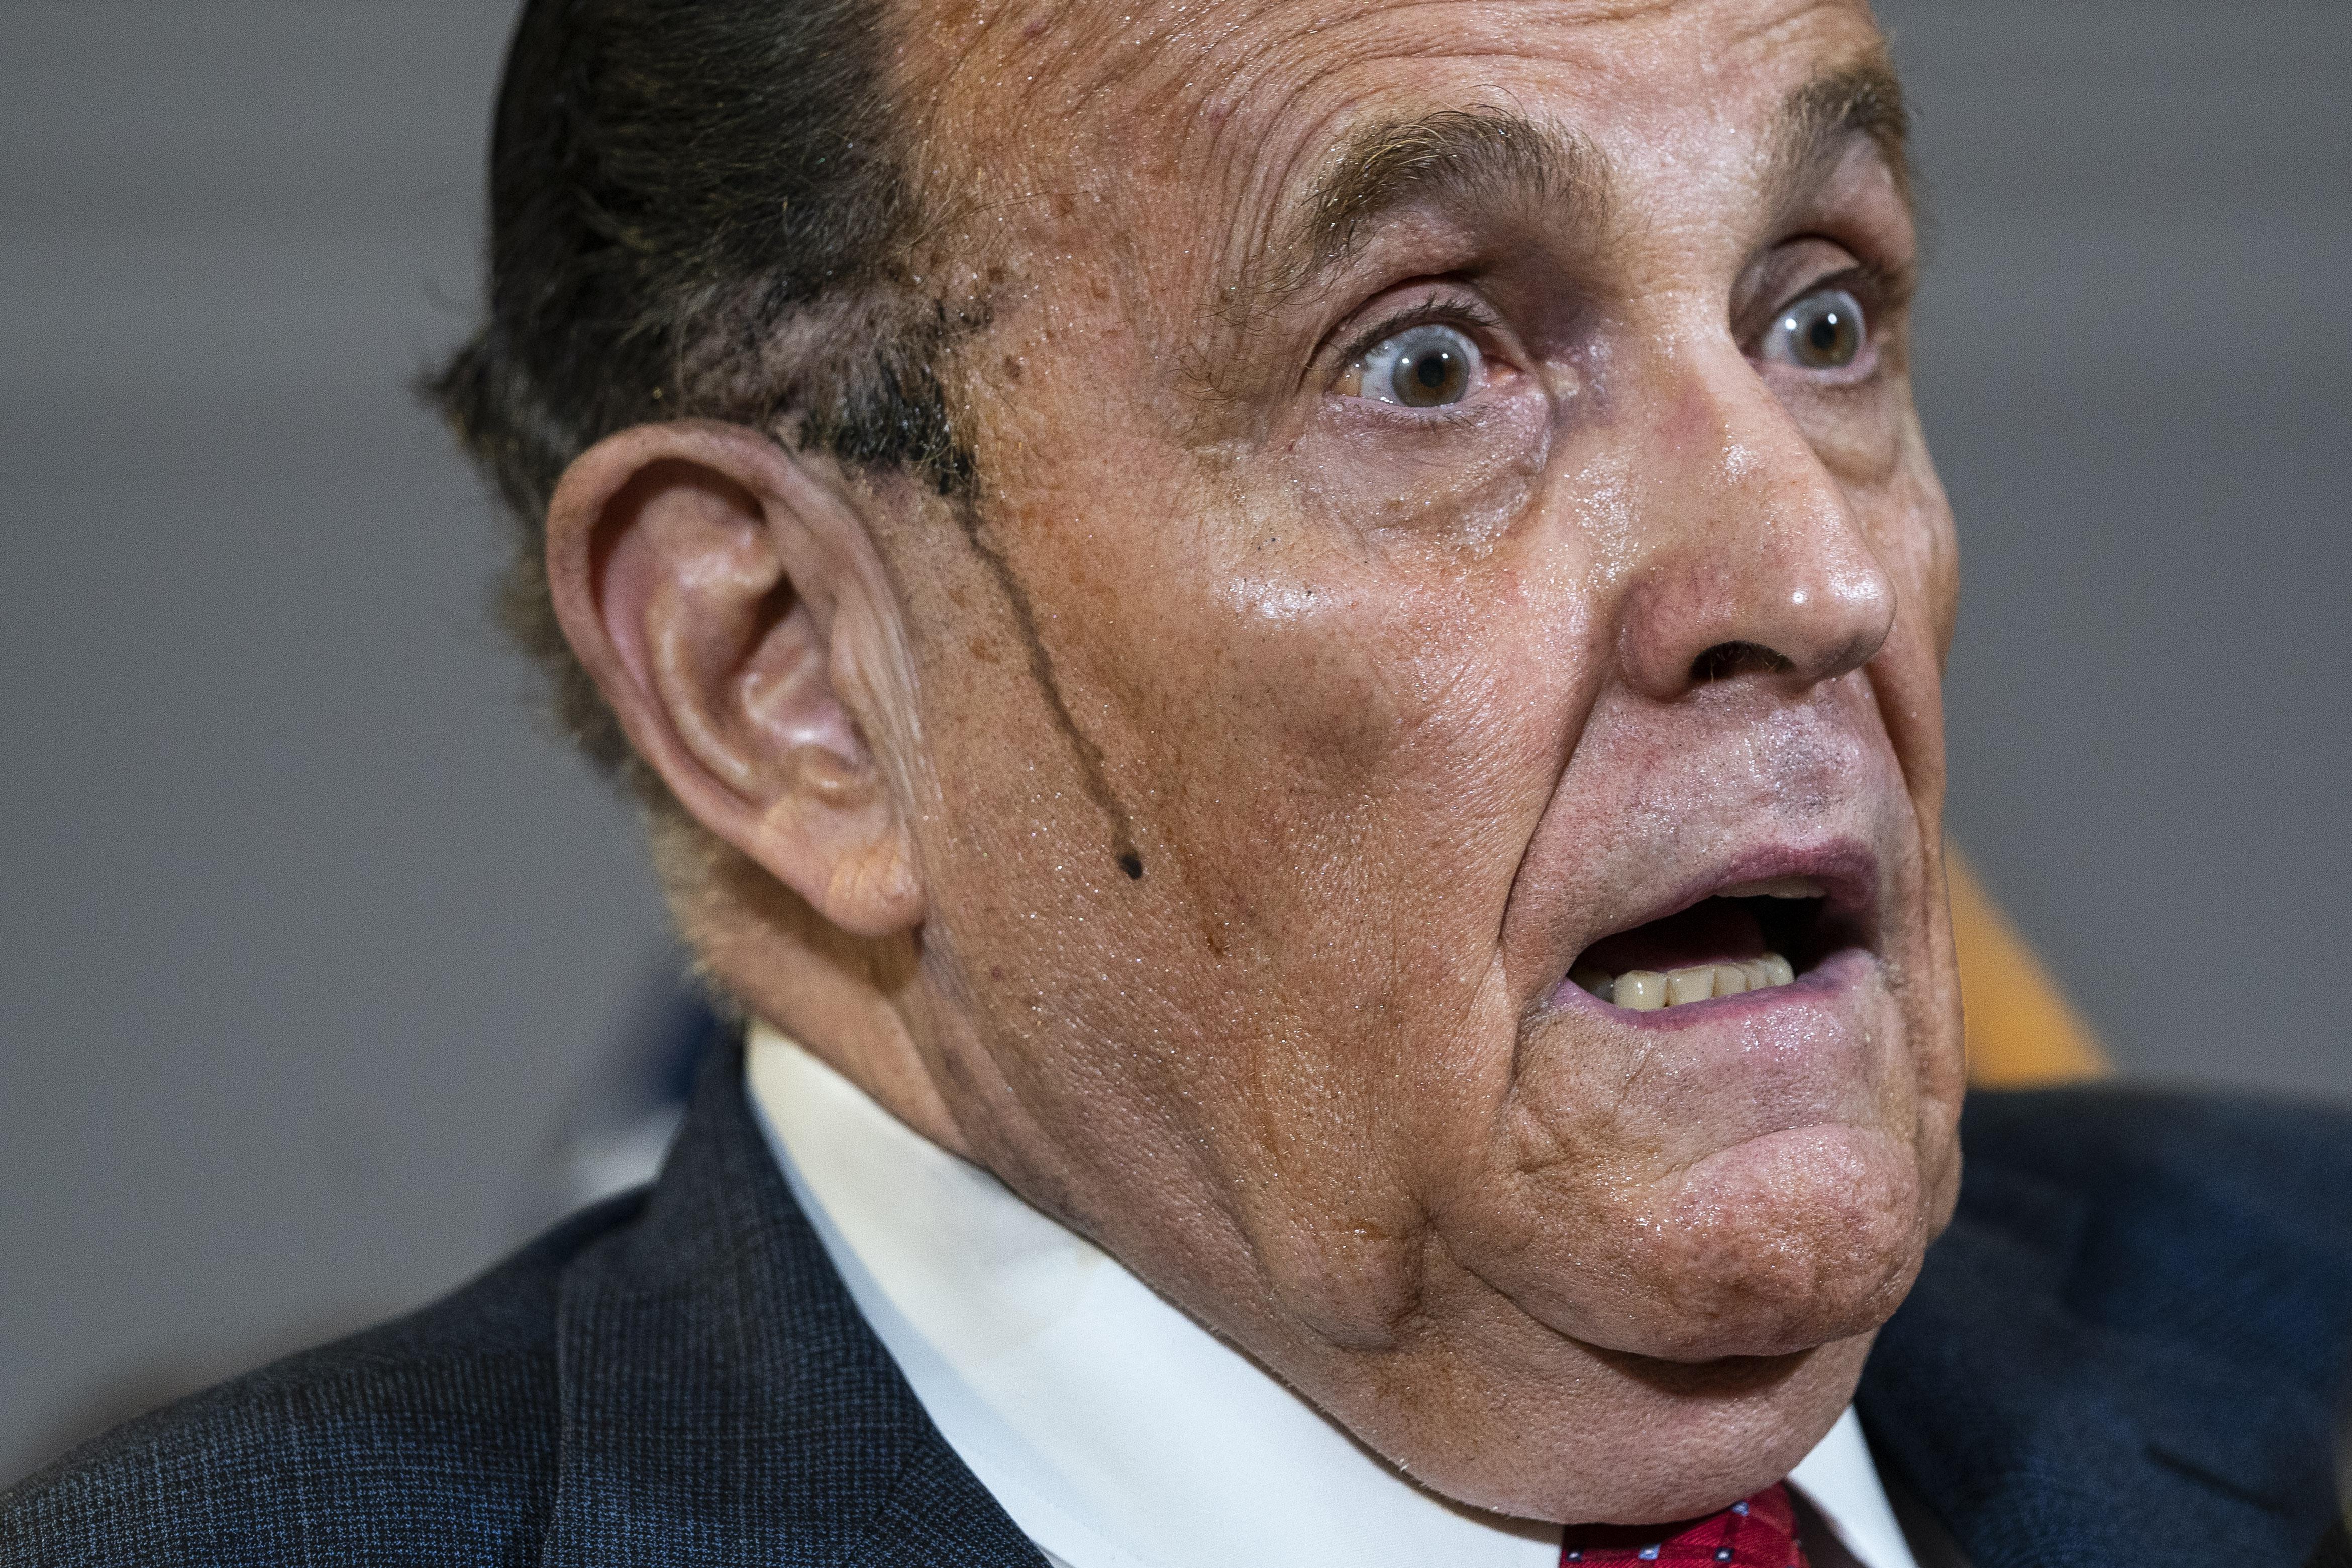 Close-up on Rudy Giuliani looking aghast, with hair dye dripping down the side of his face, during a press conference